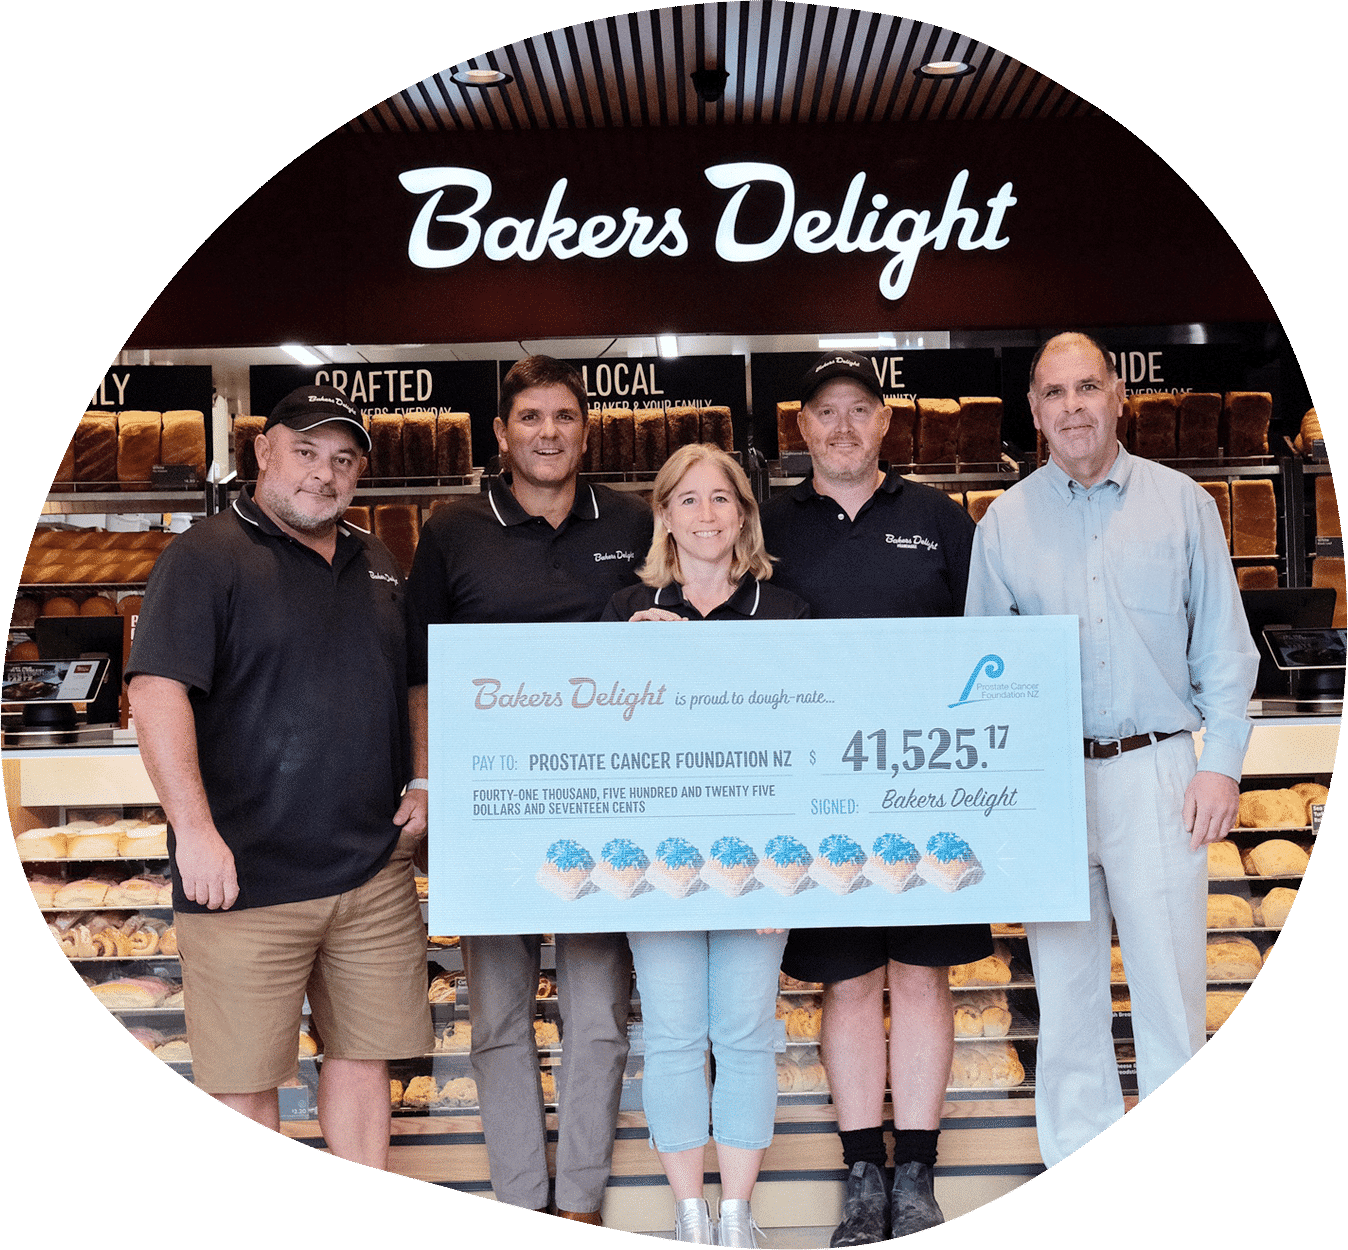 Prostate Cancer Bakers Delight NZ